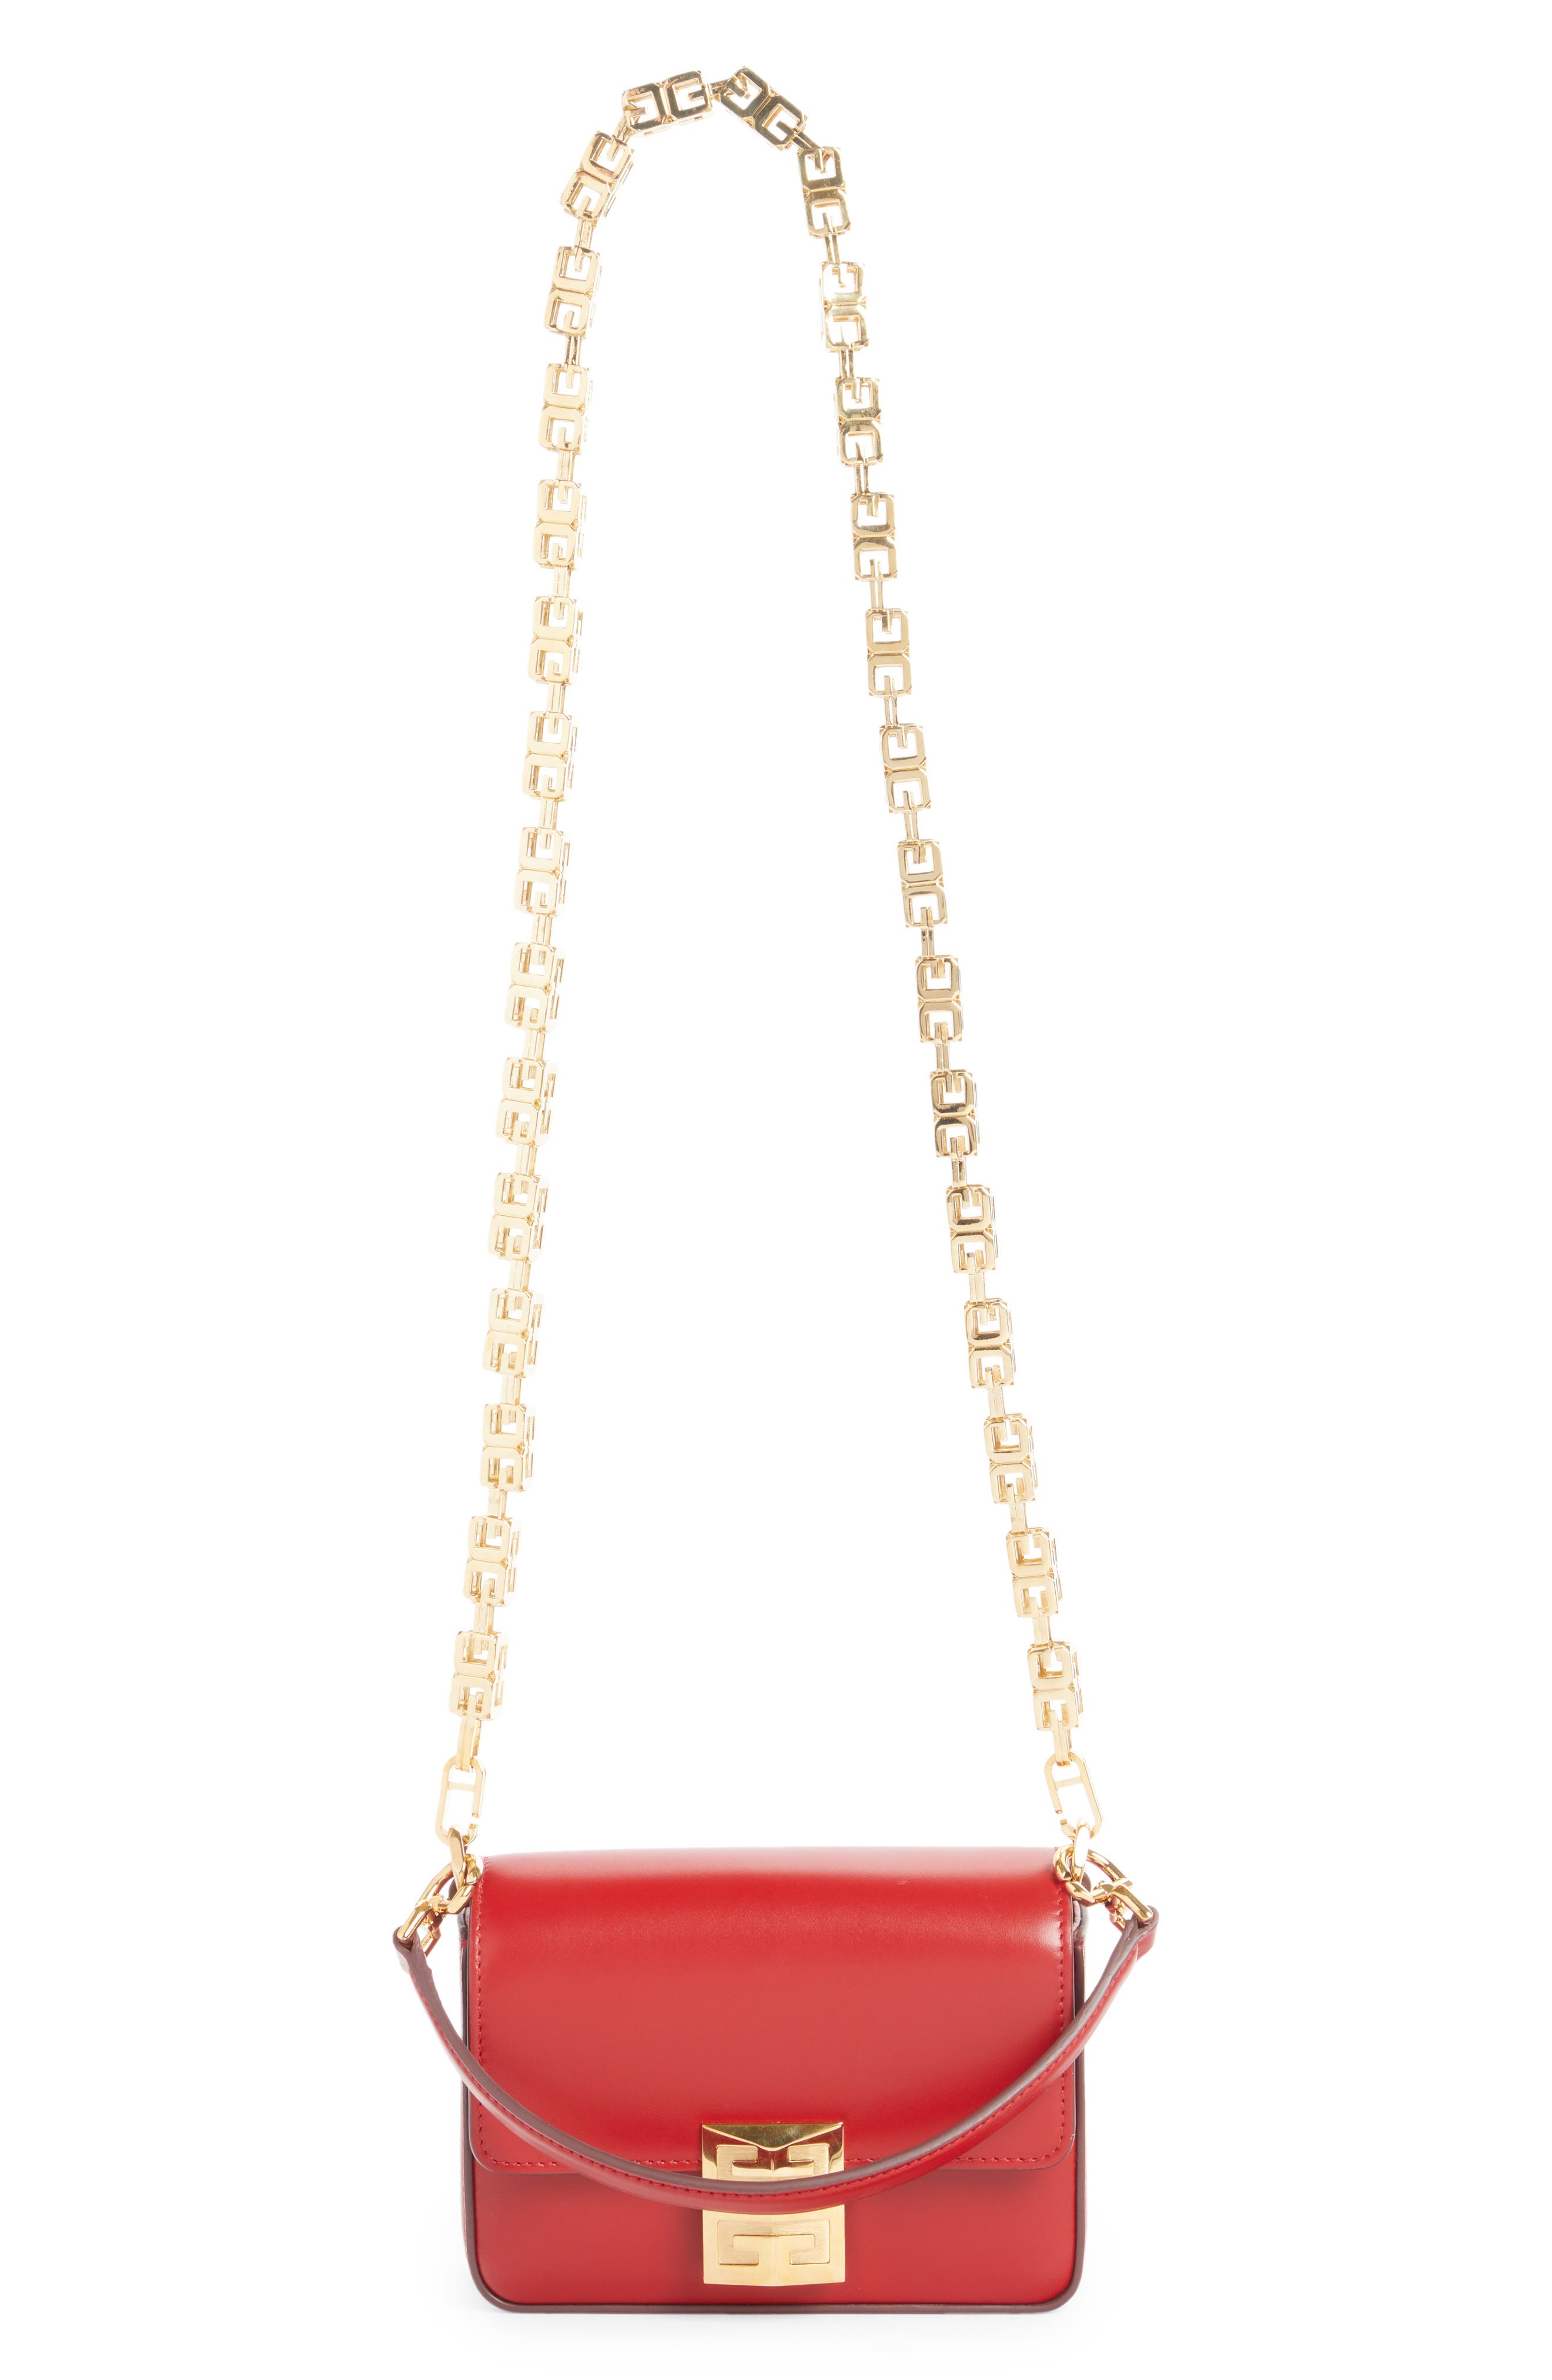 Givenchy Small G-Cube Chain Leather Crossbody Bag in Dark Red